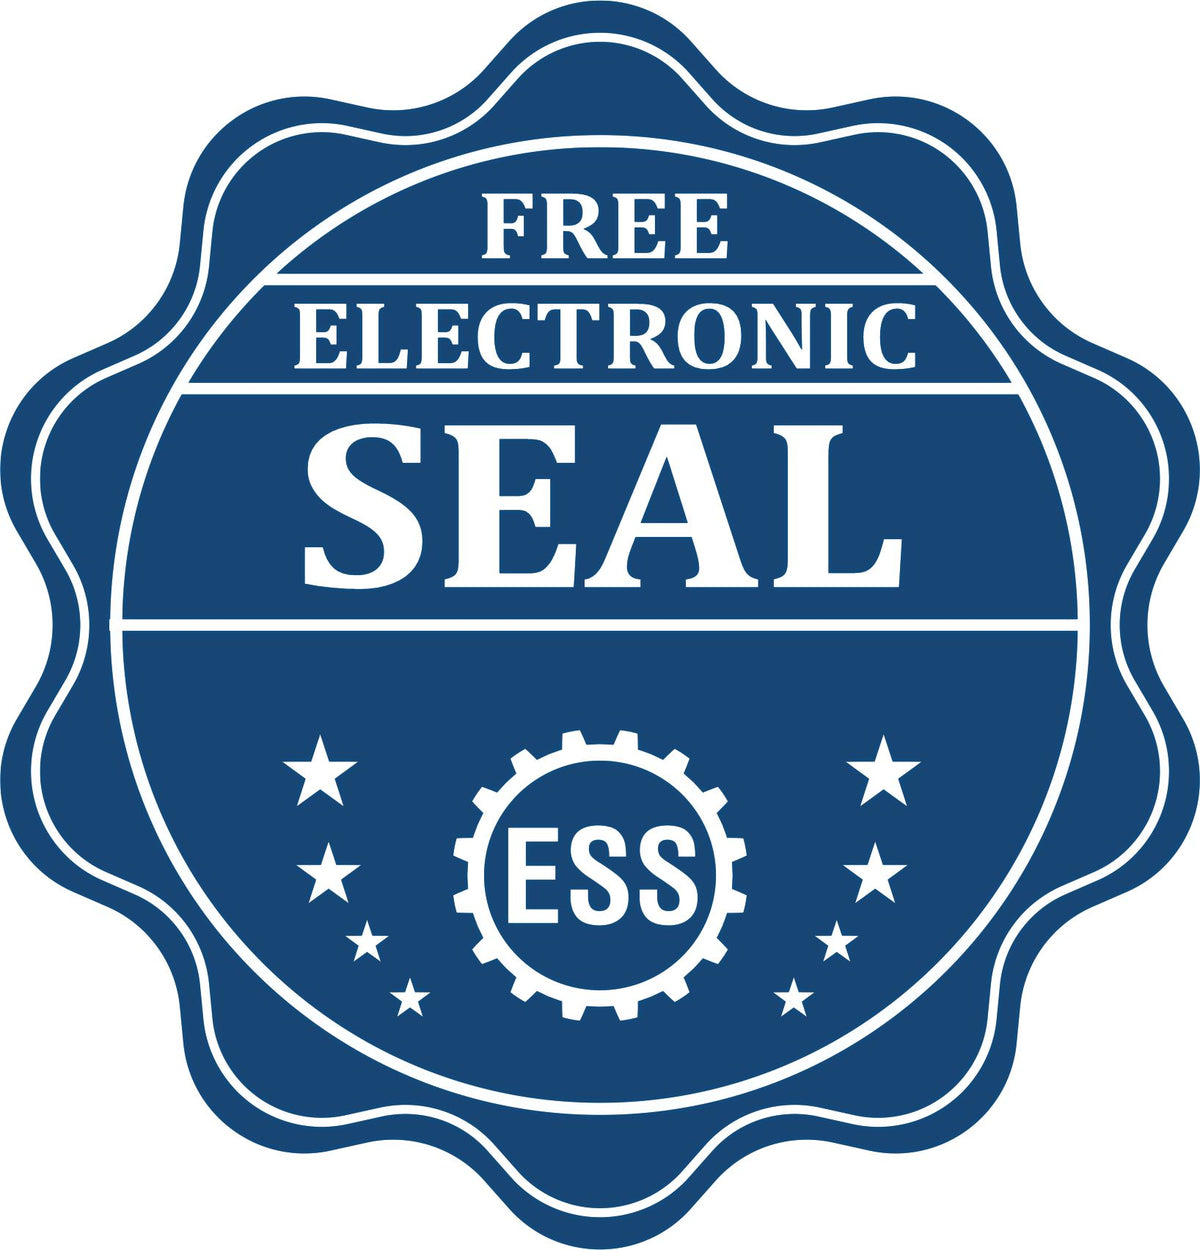 A badge showing a free electronic seal for the Long Reach Maine Land Surveyor Seal with stars and the ESS gear on the emblem.